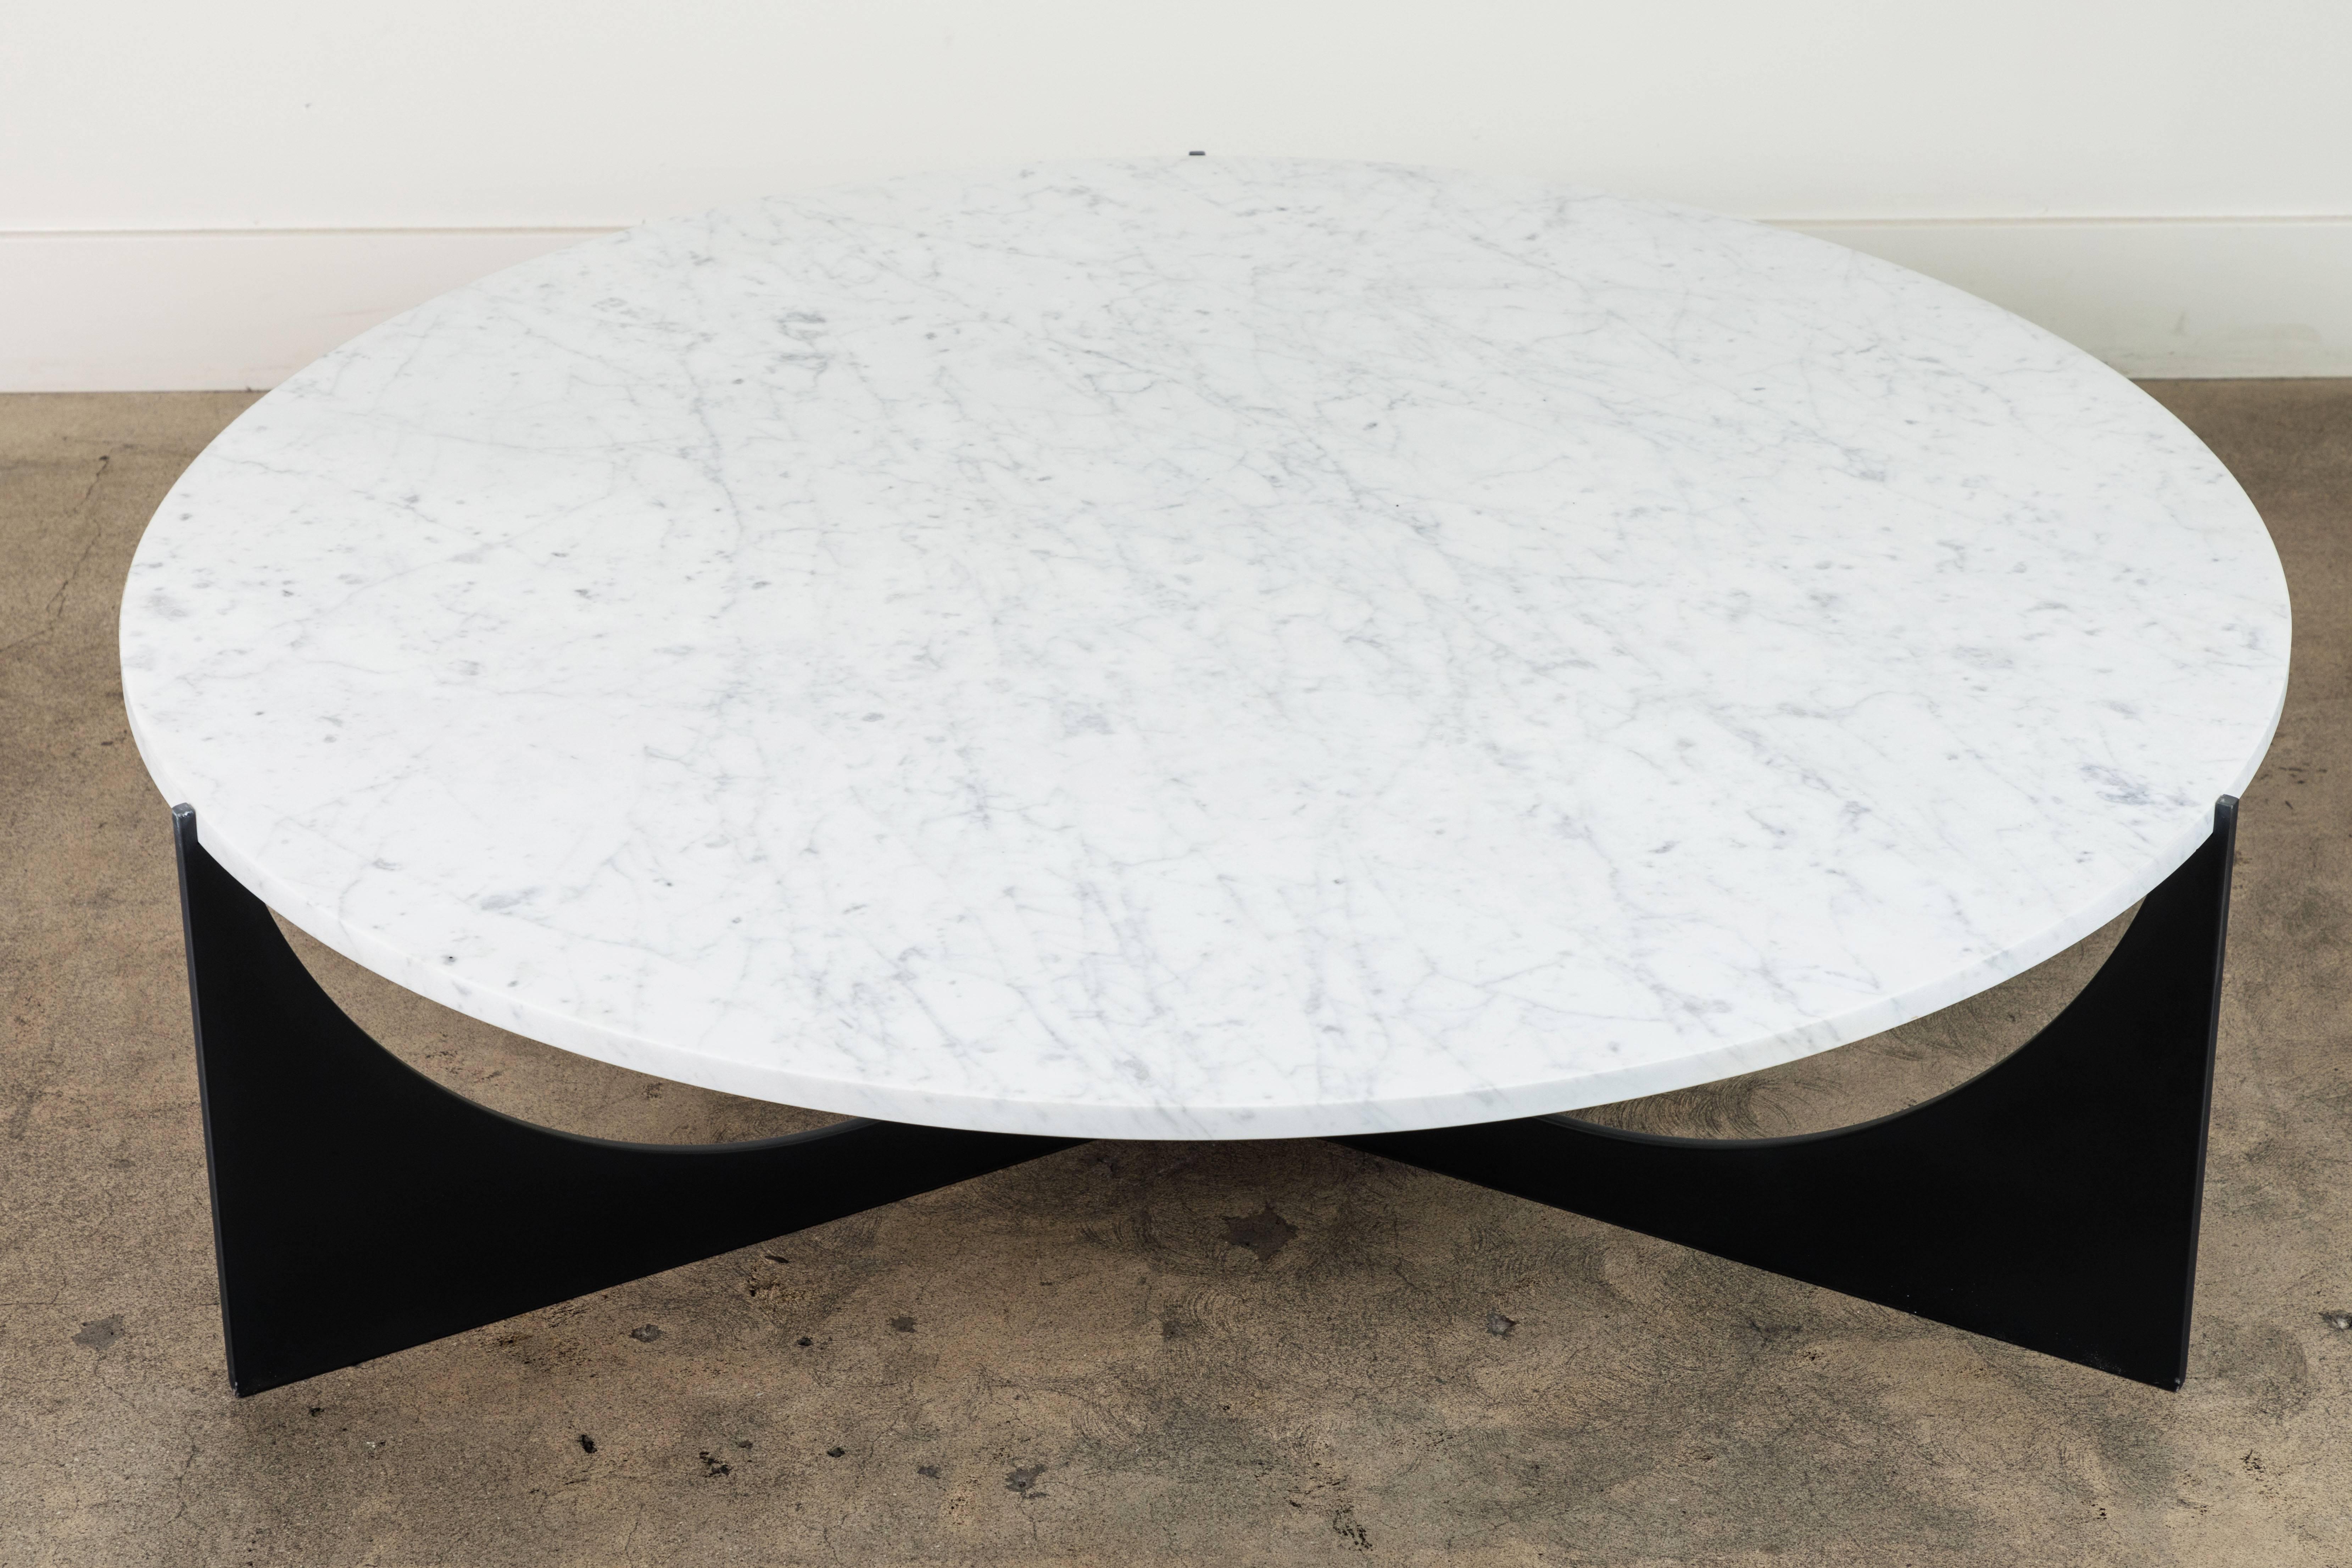 Contemporary Eclipse Coffee Table in Blackened Steel and Carrara Marble by Ten10